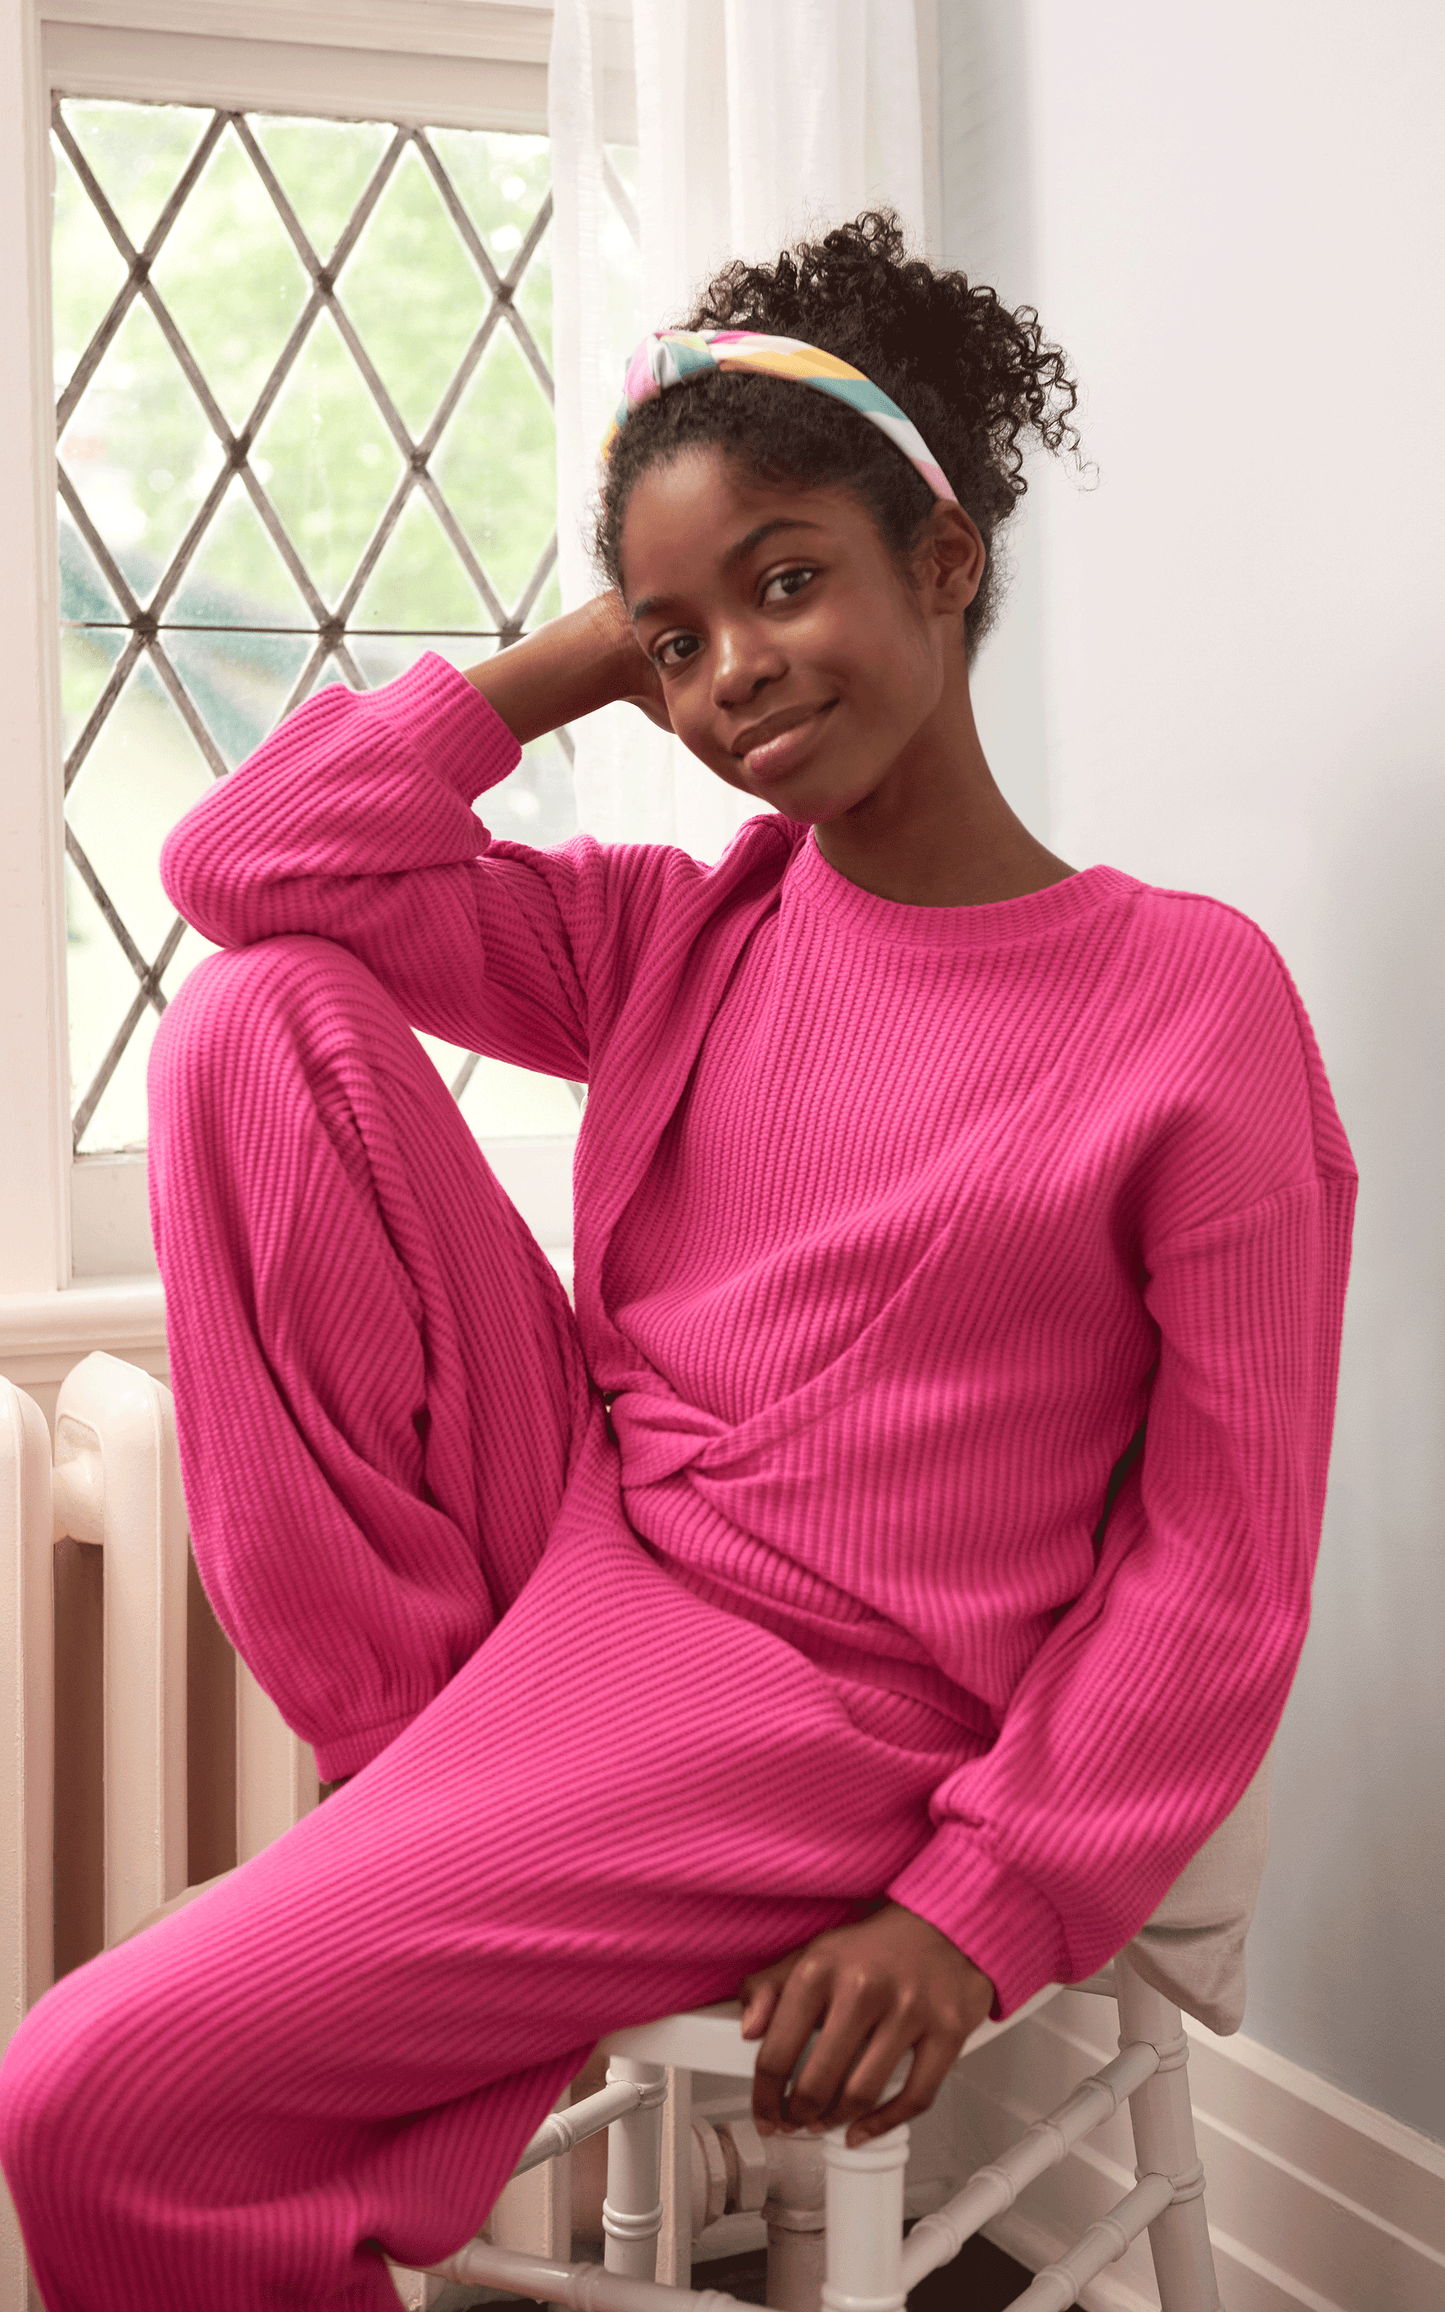 GIRL SITTING ON RADIATOR BY A WINDOW WEARING MAGENTA WAFFLE KNIT SWEATER WITH KNOT TWIST IN FRONT AND MATCHING SWEATPANTS